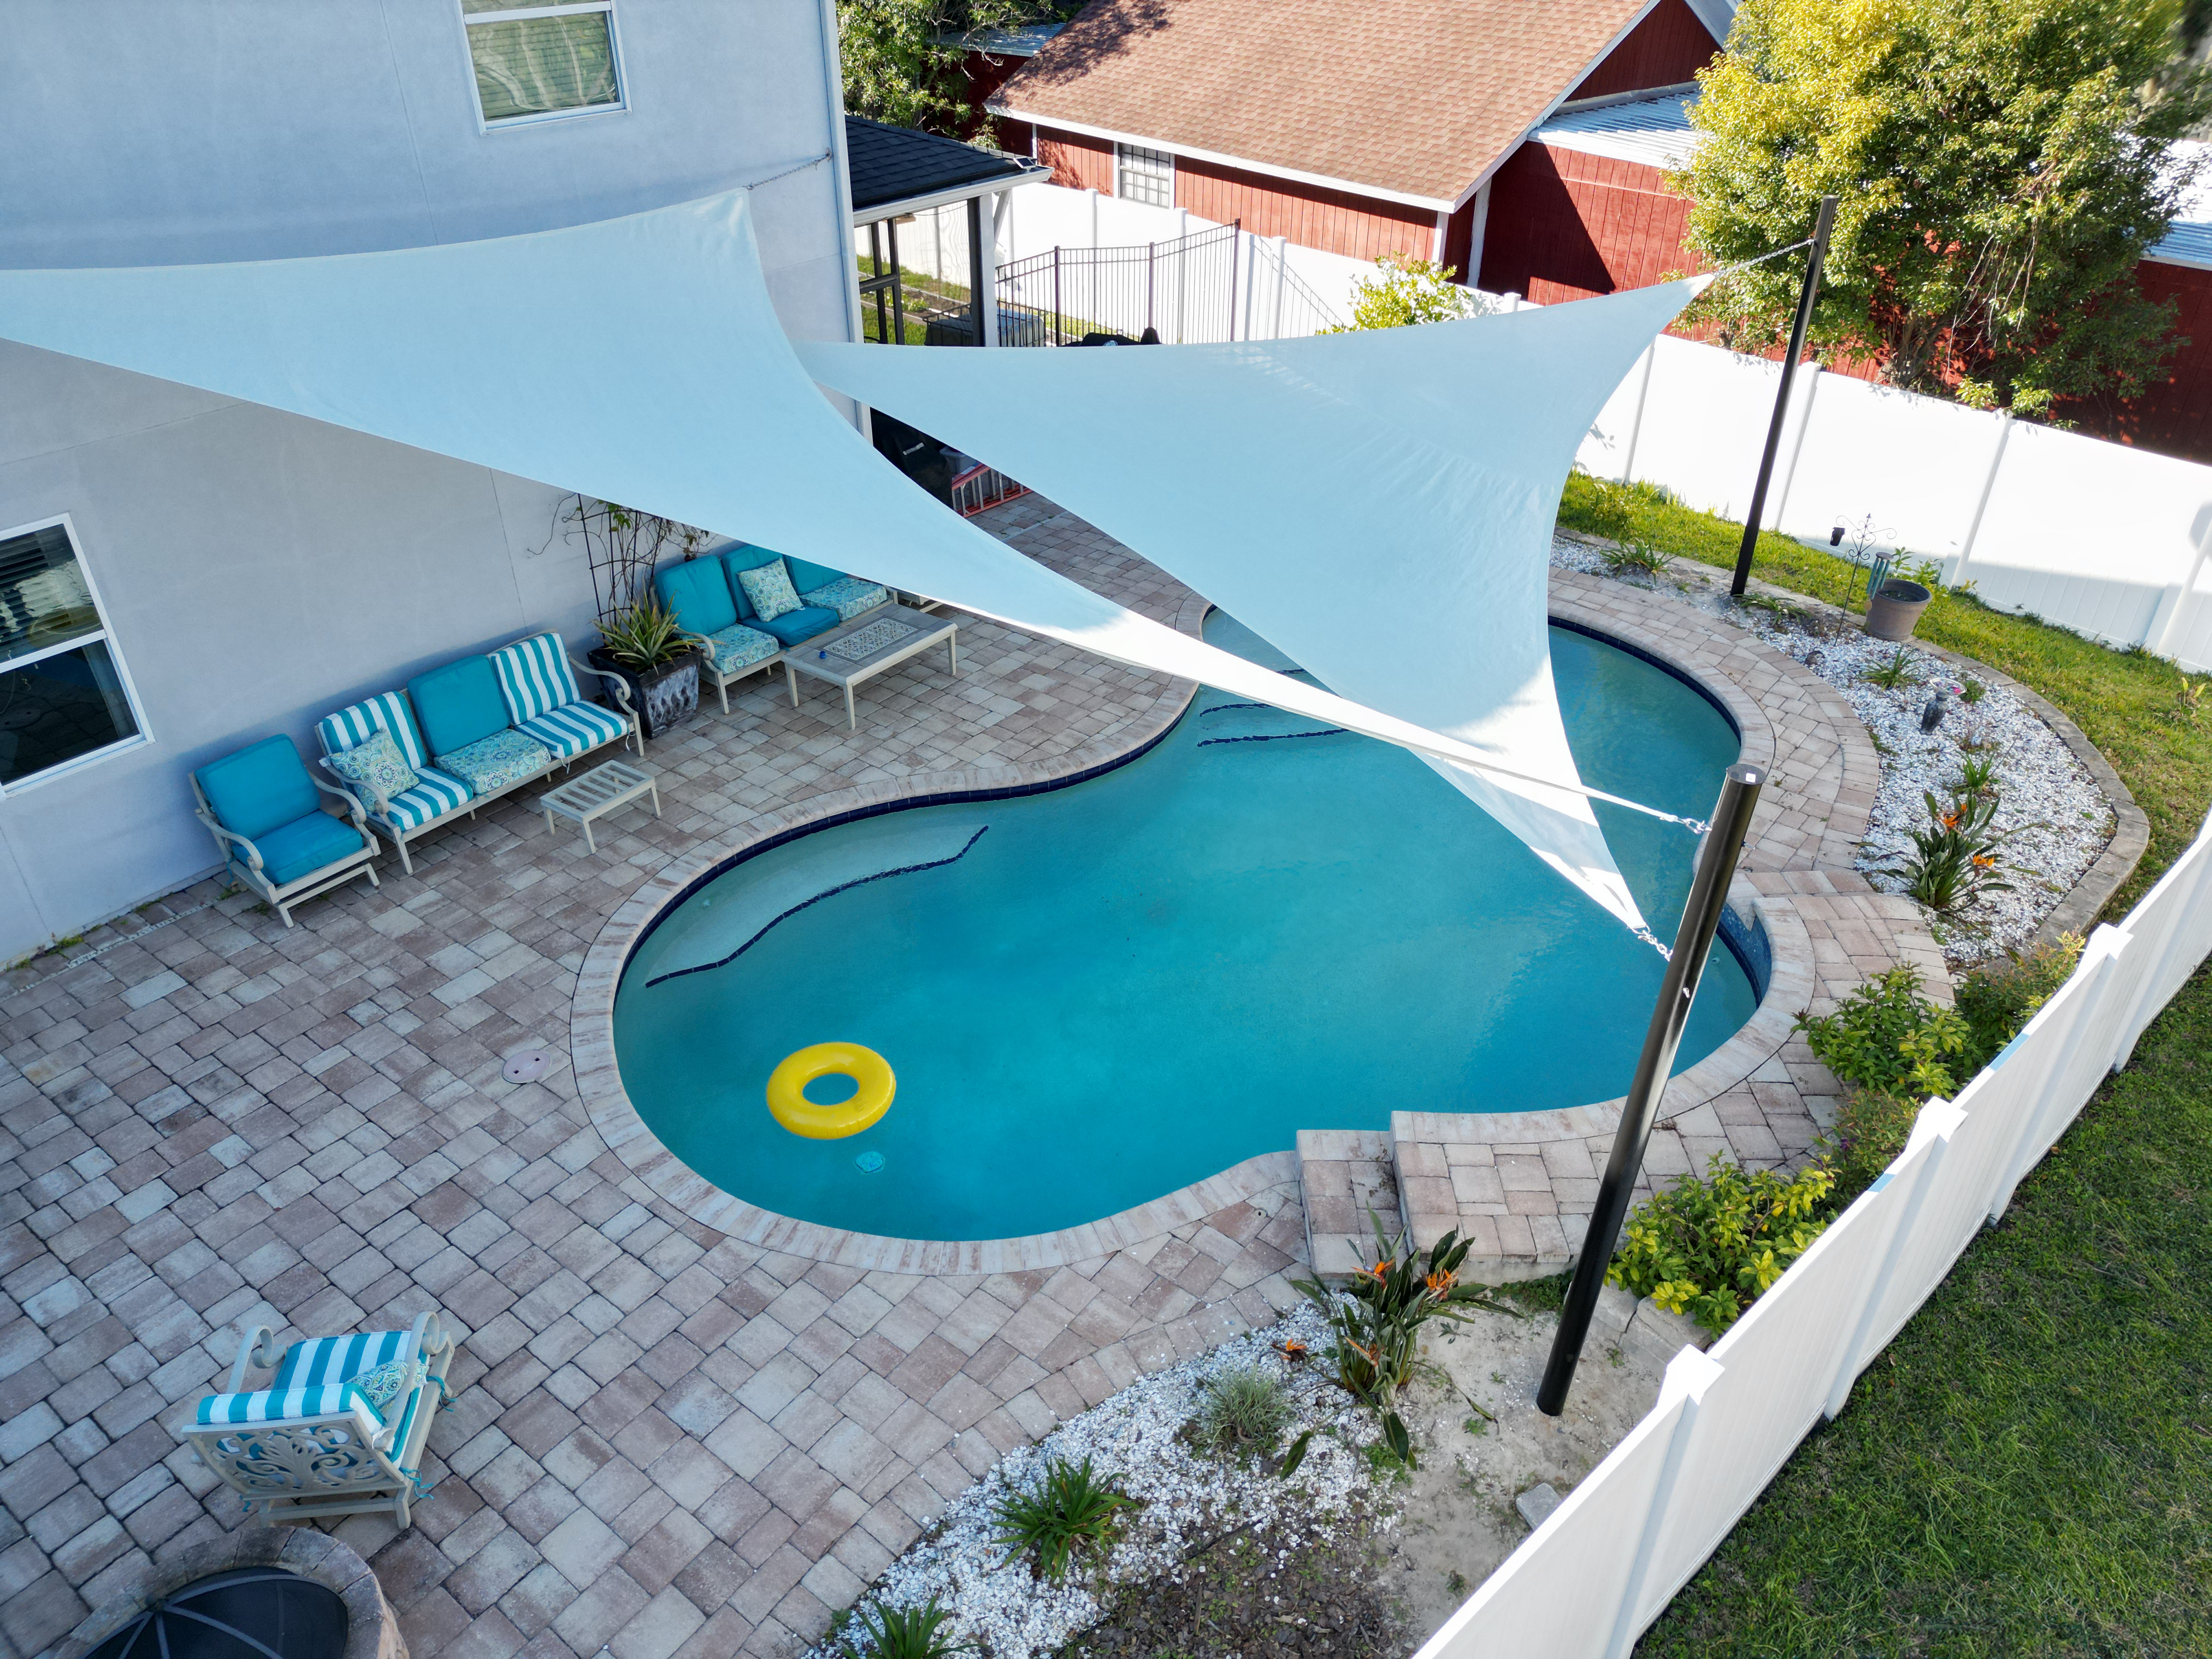 Two beautiful triangle shade sails soar over top of a backyard pool, keeping our the direct sun.